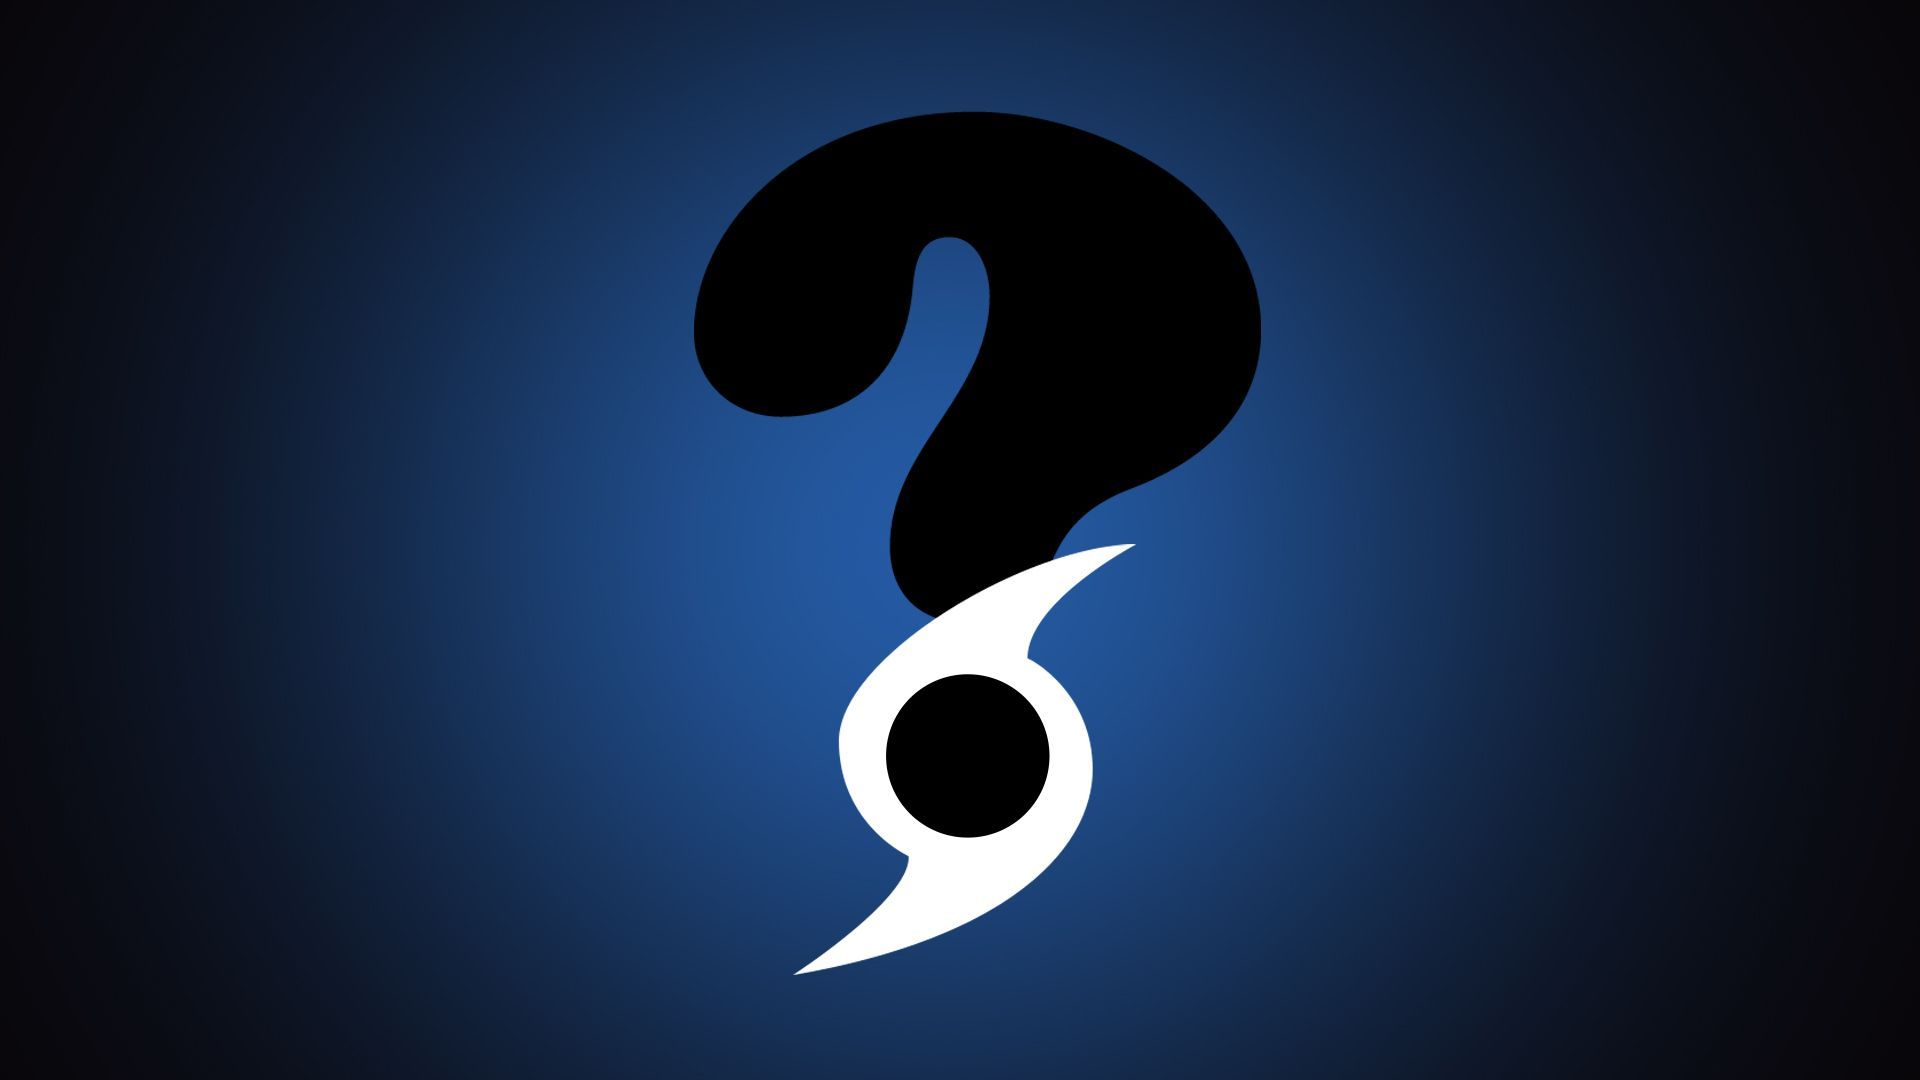 Illustration of a question mark with a hurricane icon as the dot